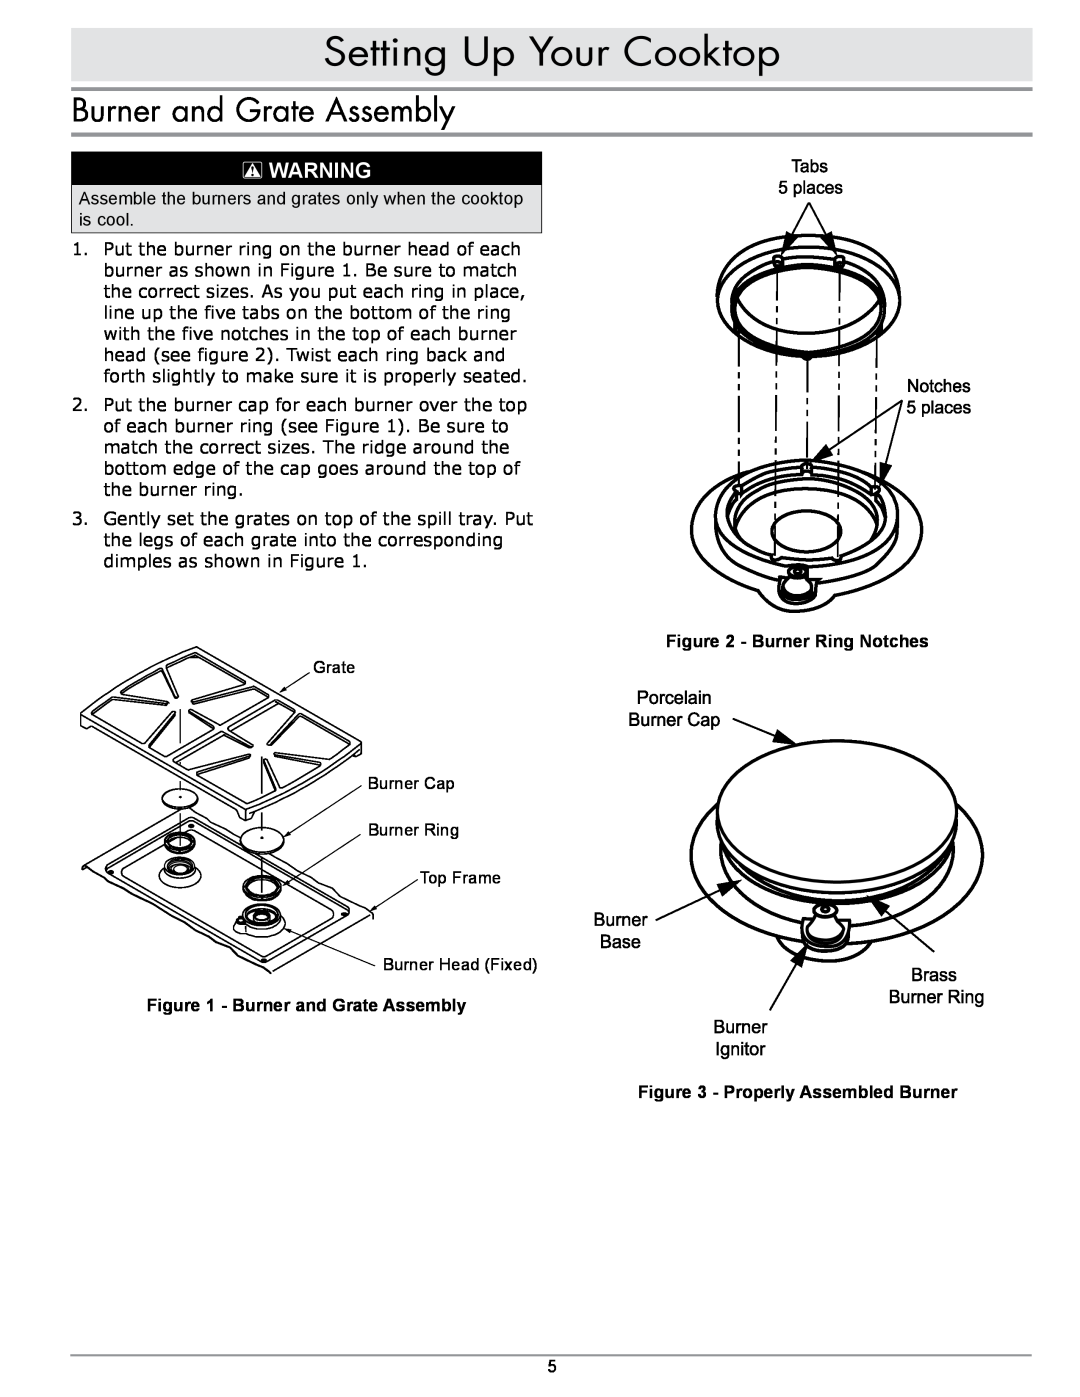 Sears SGM304, SGM466 Setting Up Your Cooktop, Burner and Grate Assembly, Burner Ring Notches, Properly Assembled Burner 